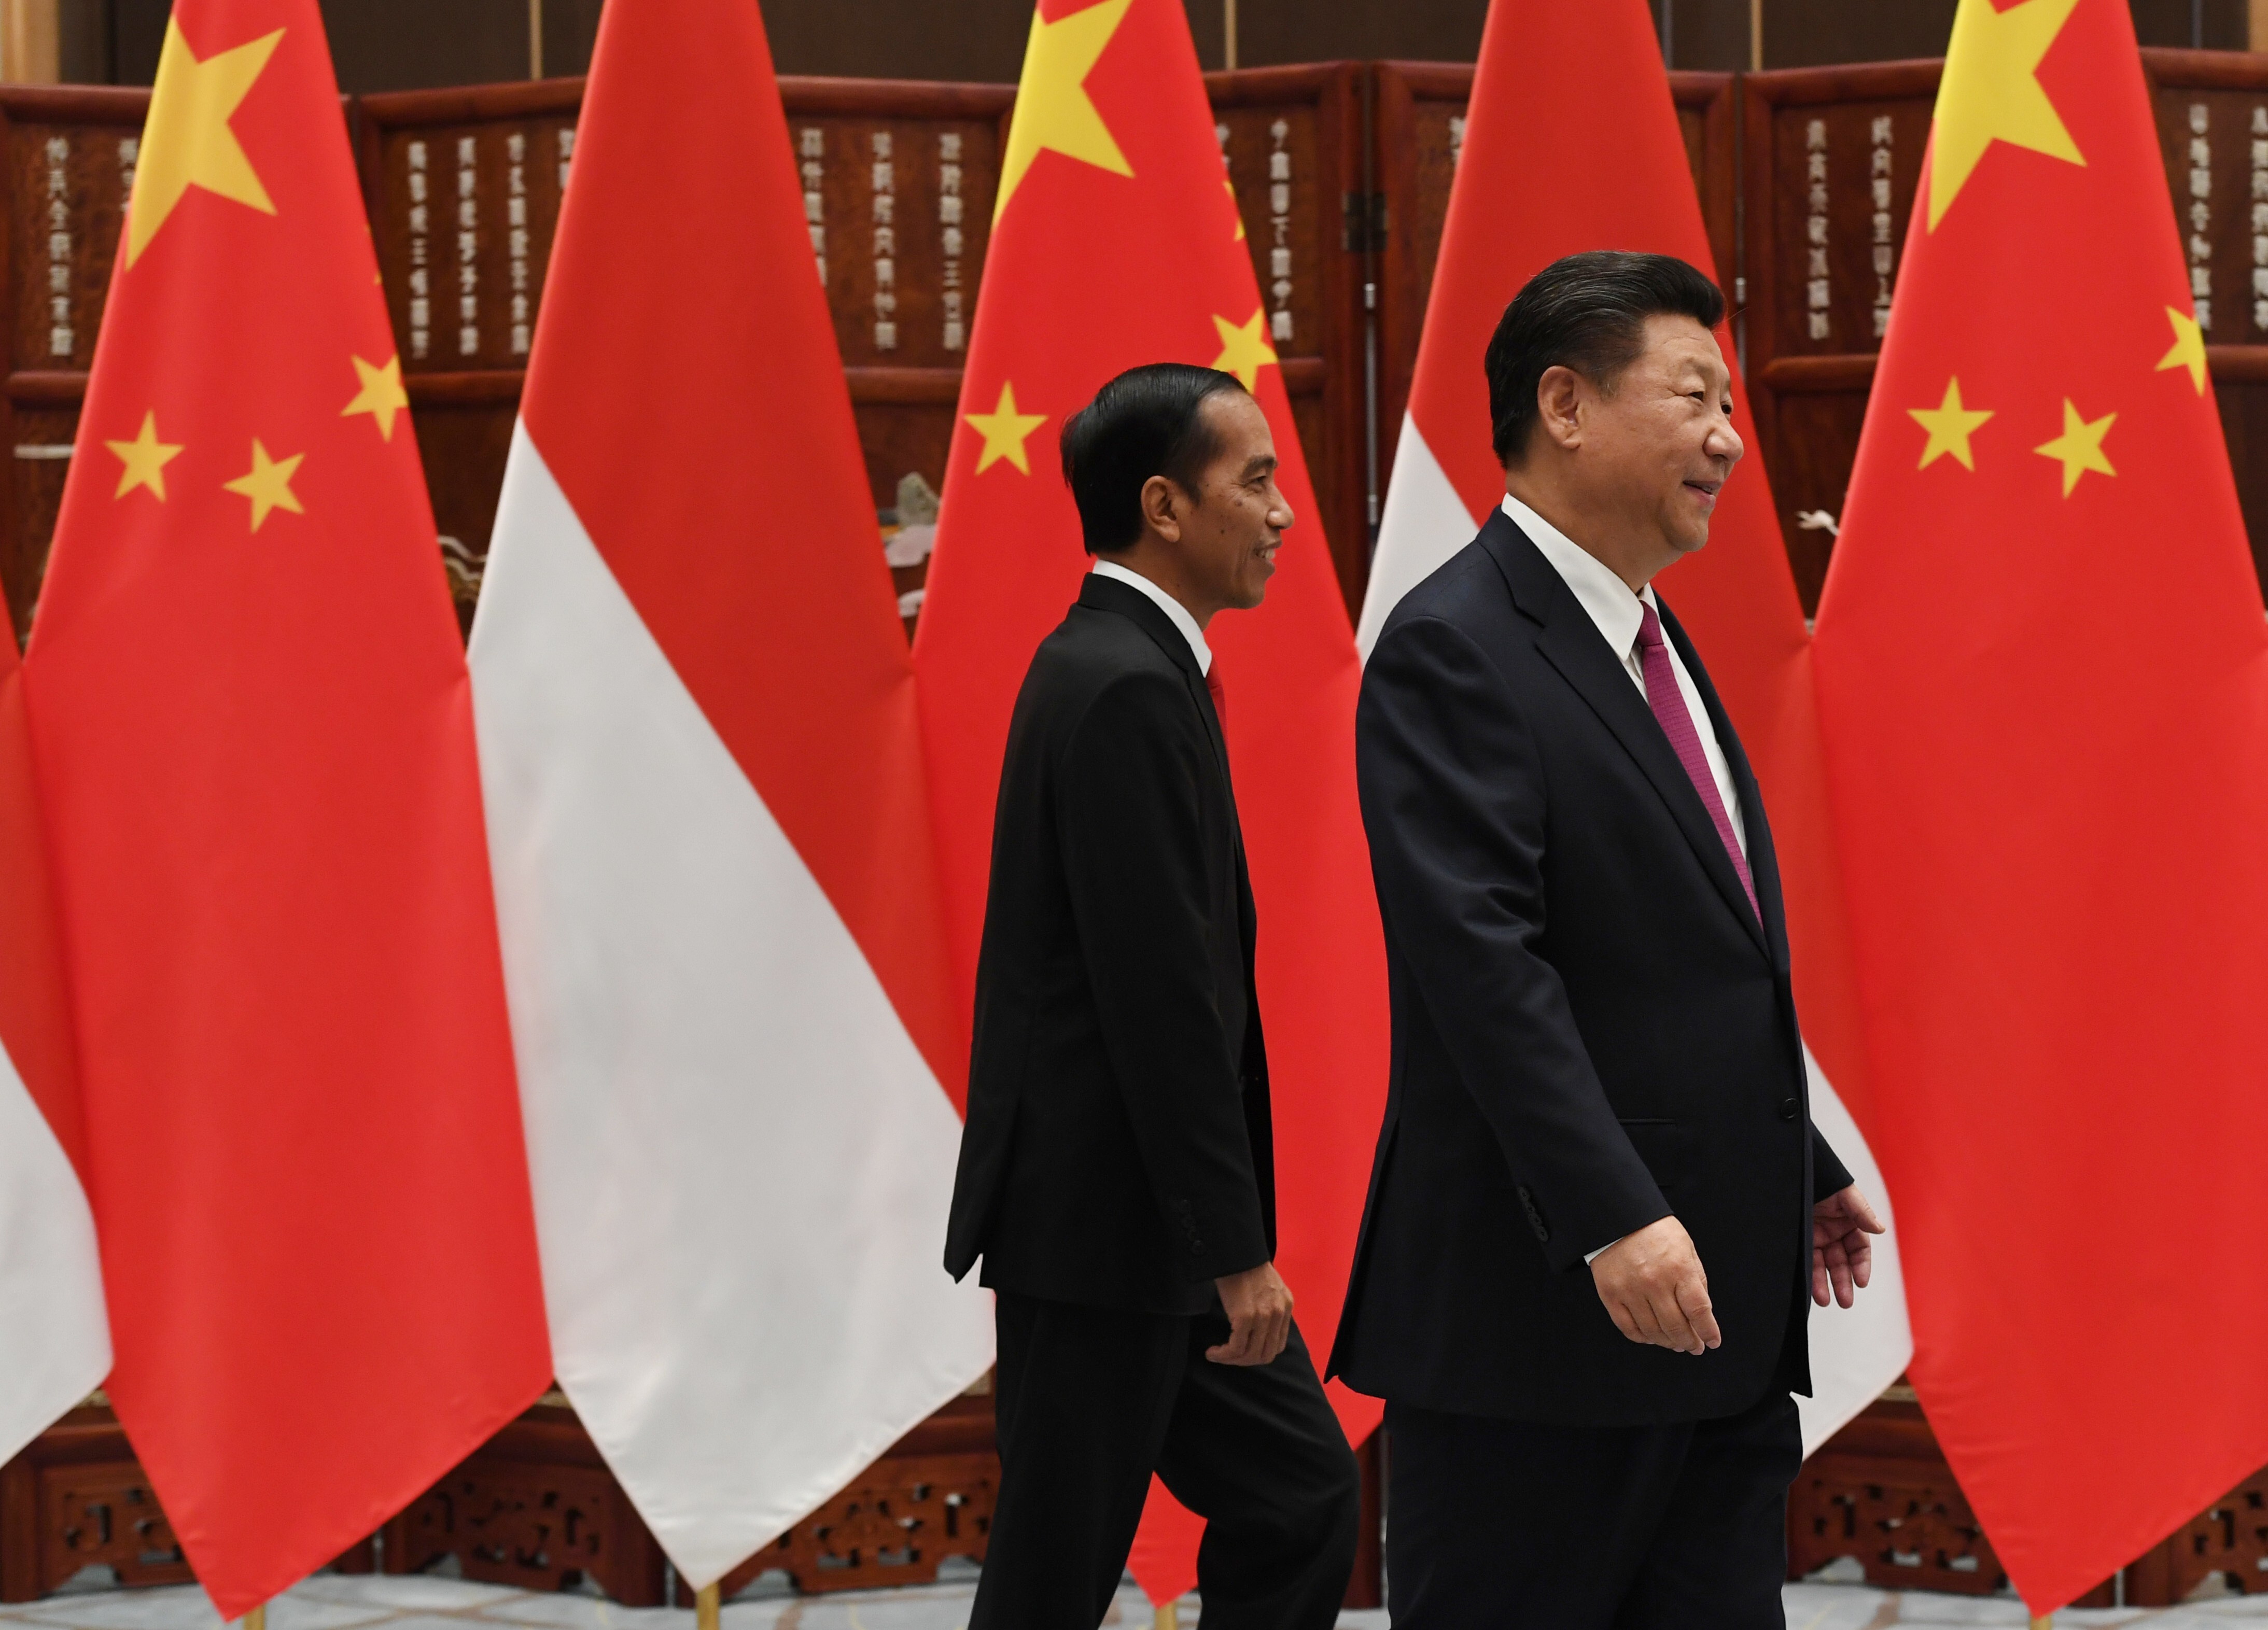 Chinese President Xi Jinping, right, and Indonesian President Joko Widodo walk together in China’s Hangzhou before a meeting in 2016. Photo: AP